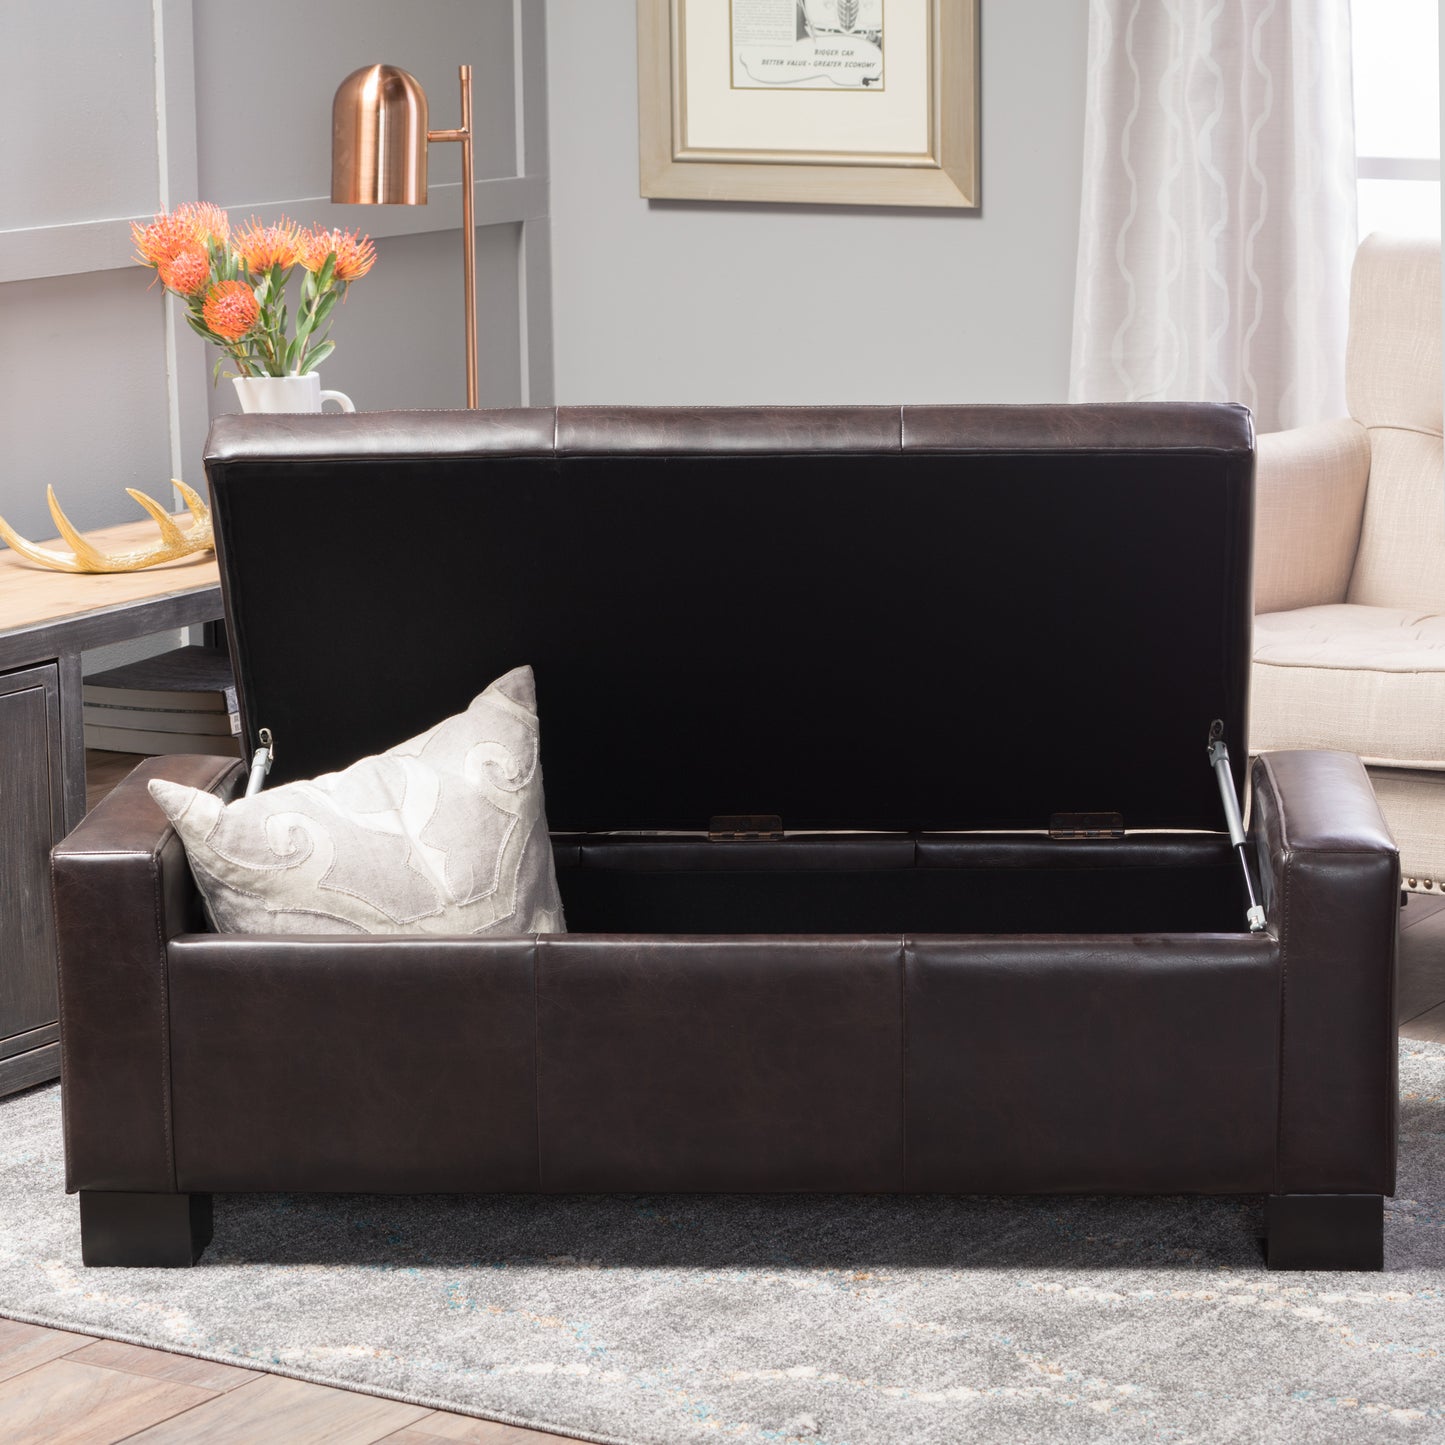 Rothwell Contemporary Tufted Bonded Leather Storage Ottoman Bench